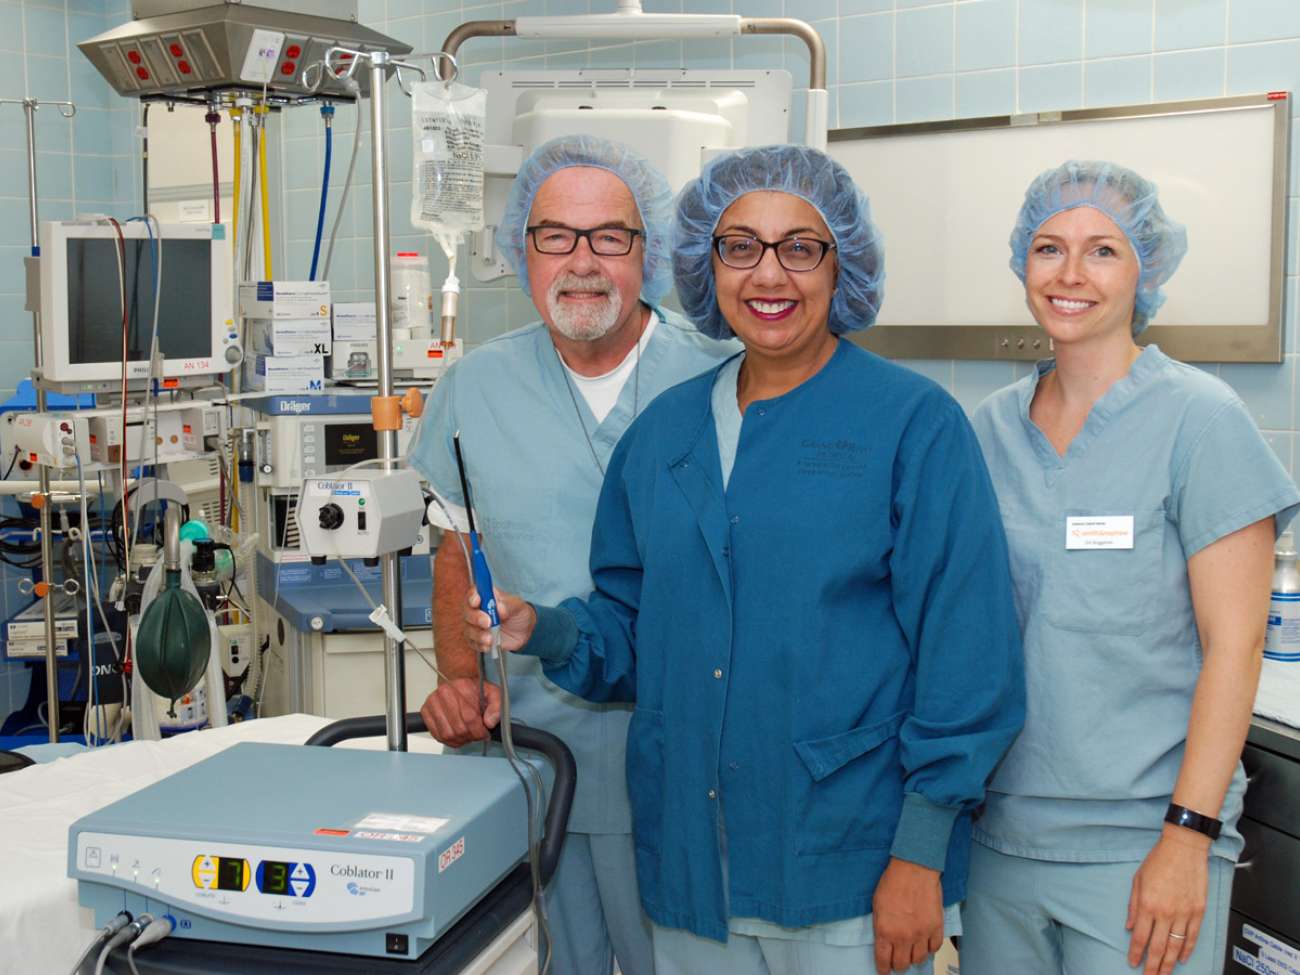 Joining Dr. Bindlish are GRH operating room manager Bob Frey and Erin Bruggeman, the representative for coblation provider Smith and Nephew.